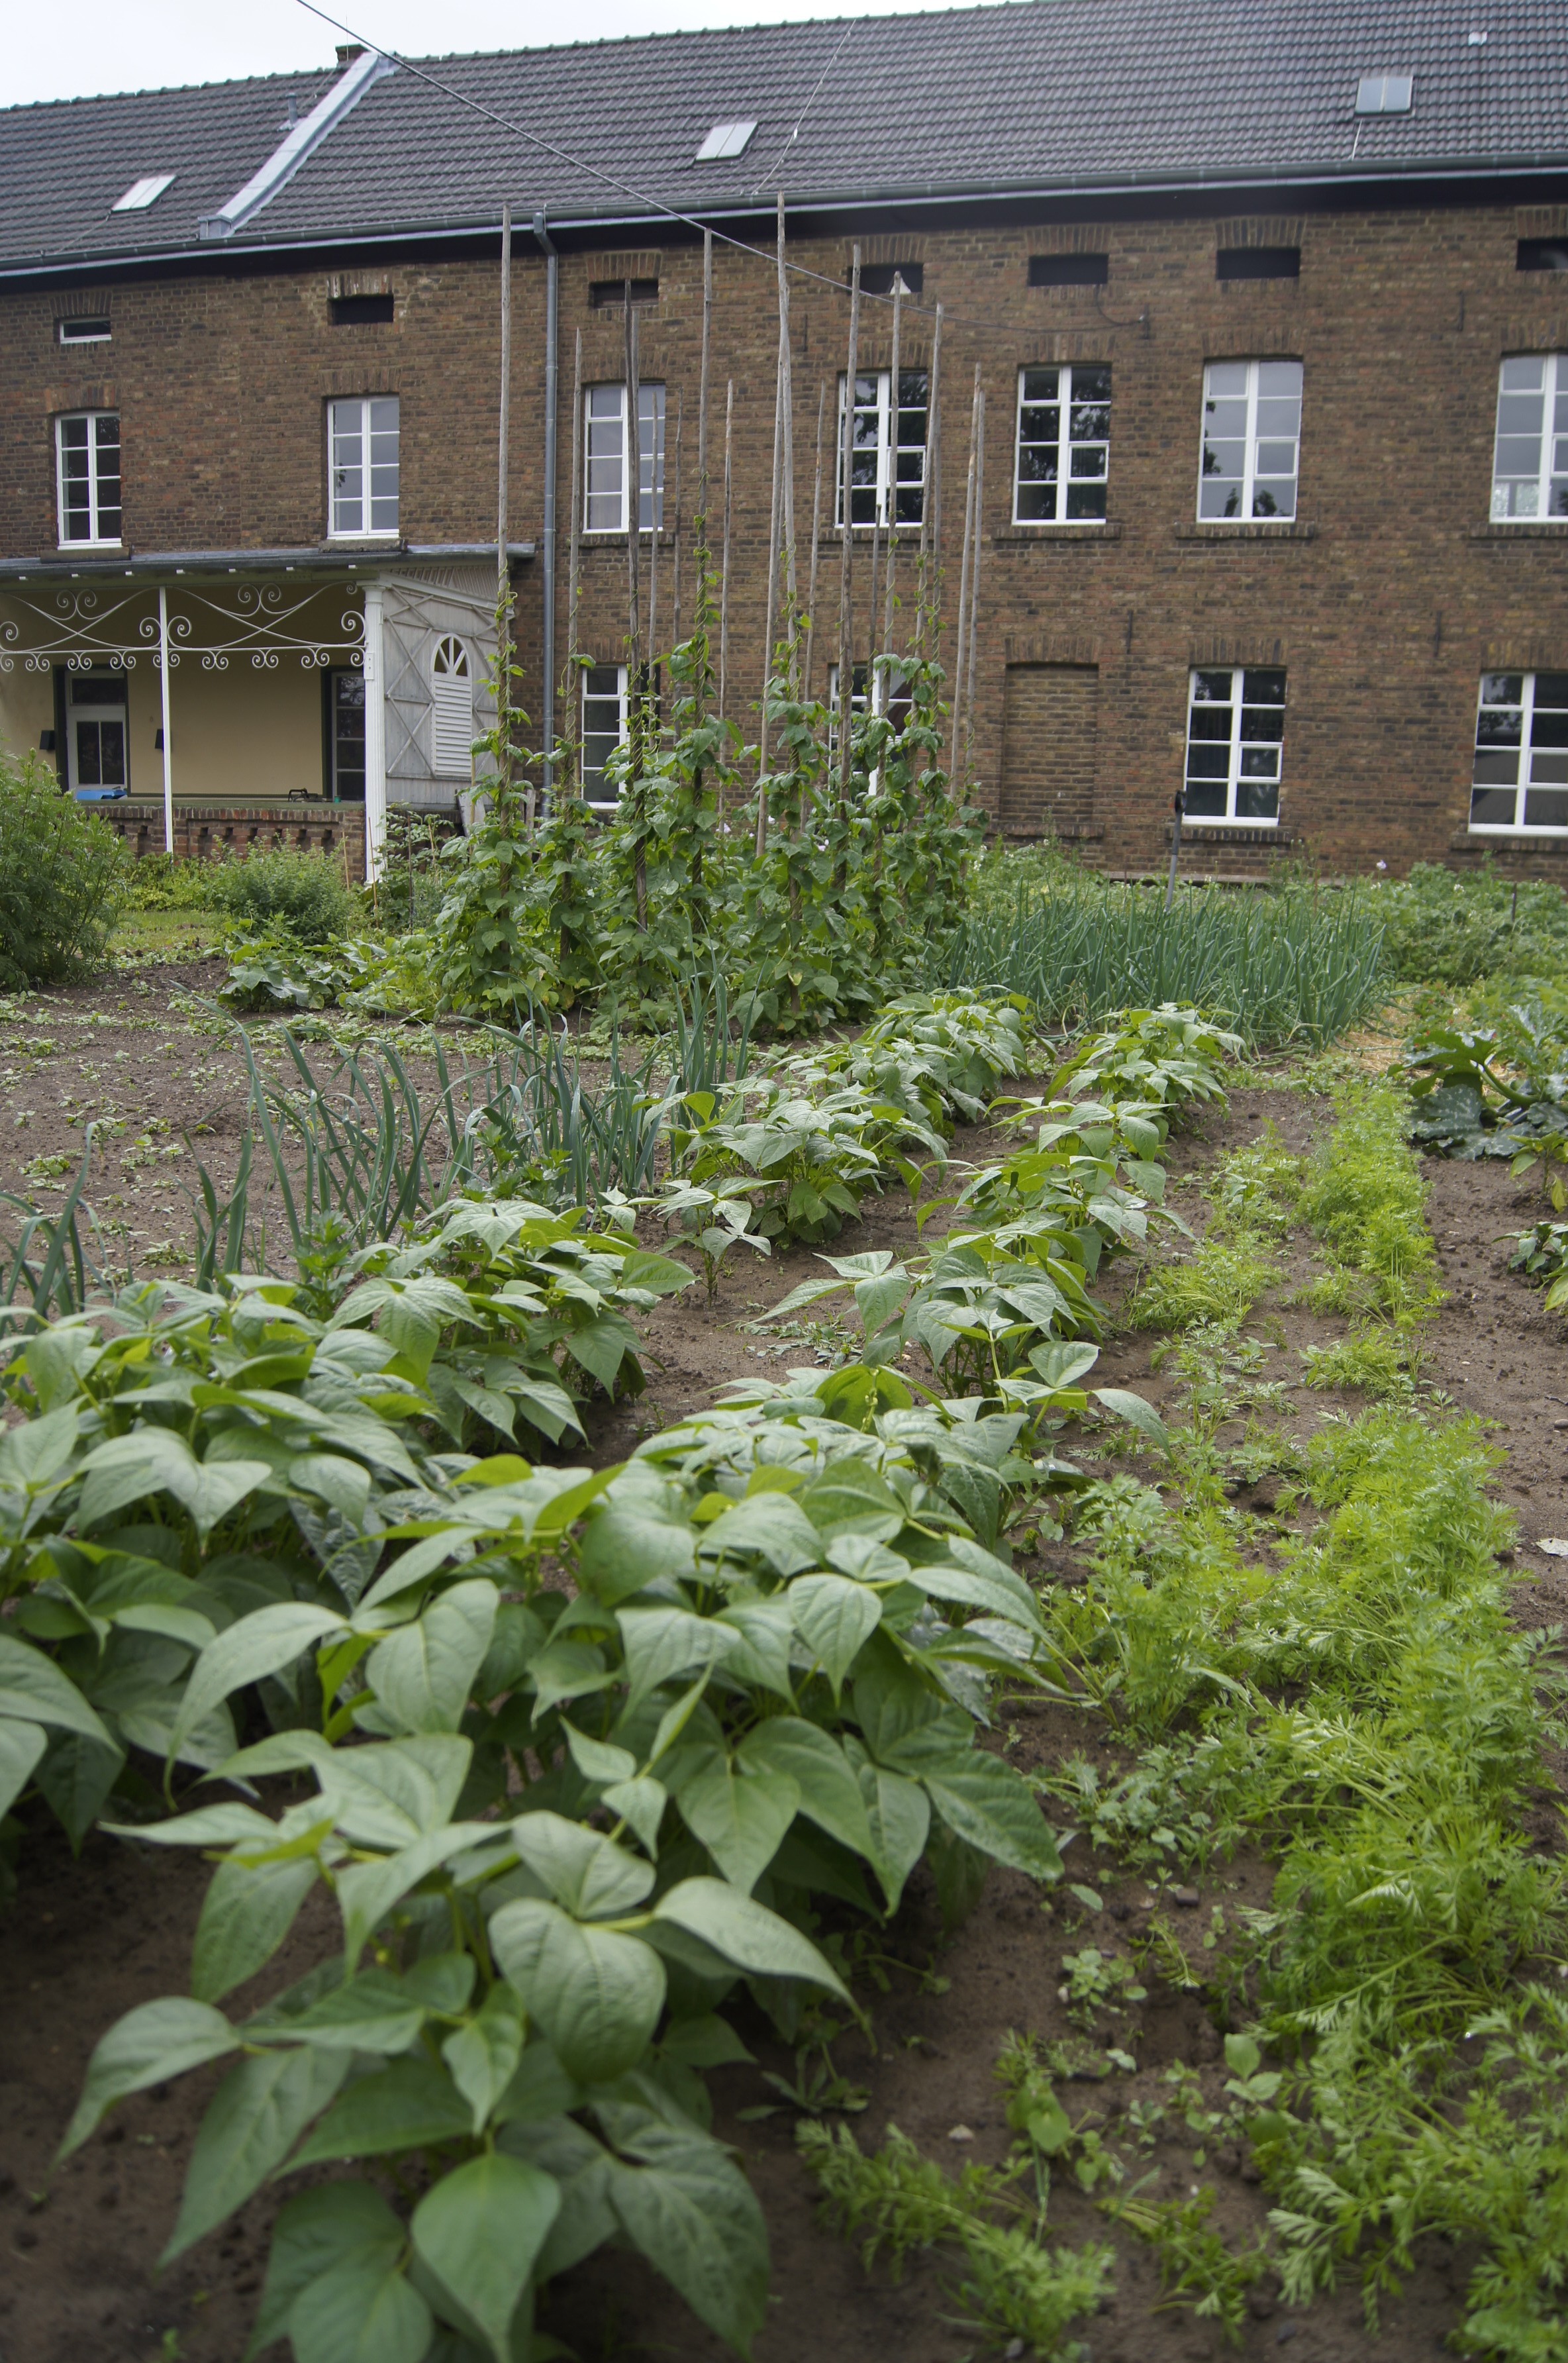 Old style vegetable garden. Even the outdoor premises of the Tuchfabrik Müller (Cloth Factory) have been arranged so that everything appears as it did in the final year of operation - 1961. (Photo: Detlef Stender)